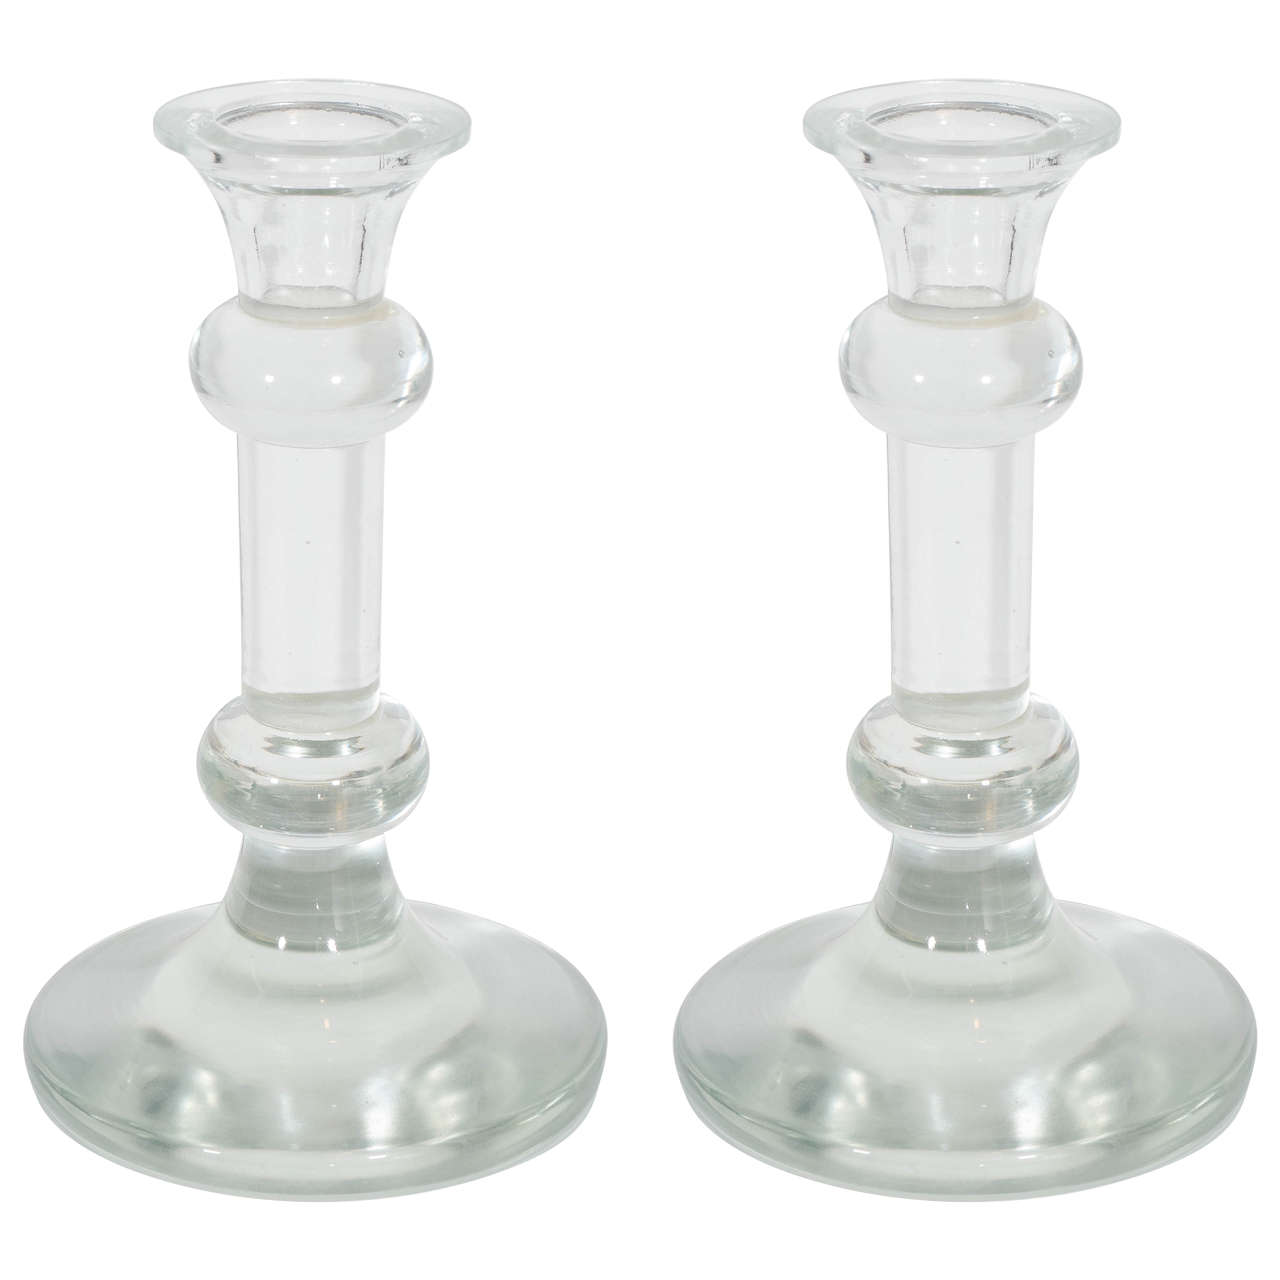 A Pair of Murano Glass Candlesticks by Seguso in the Style of Karl Springer